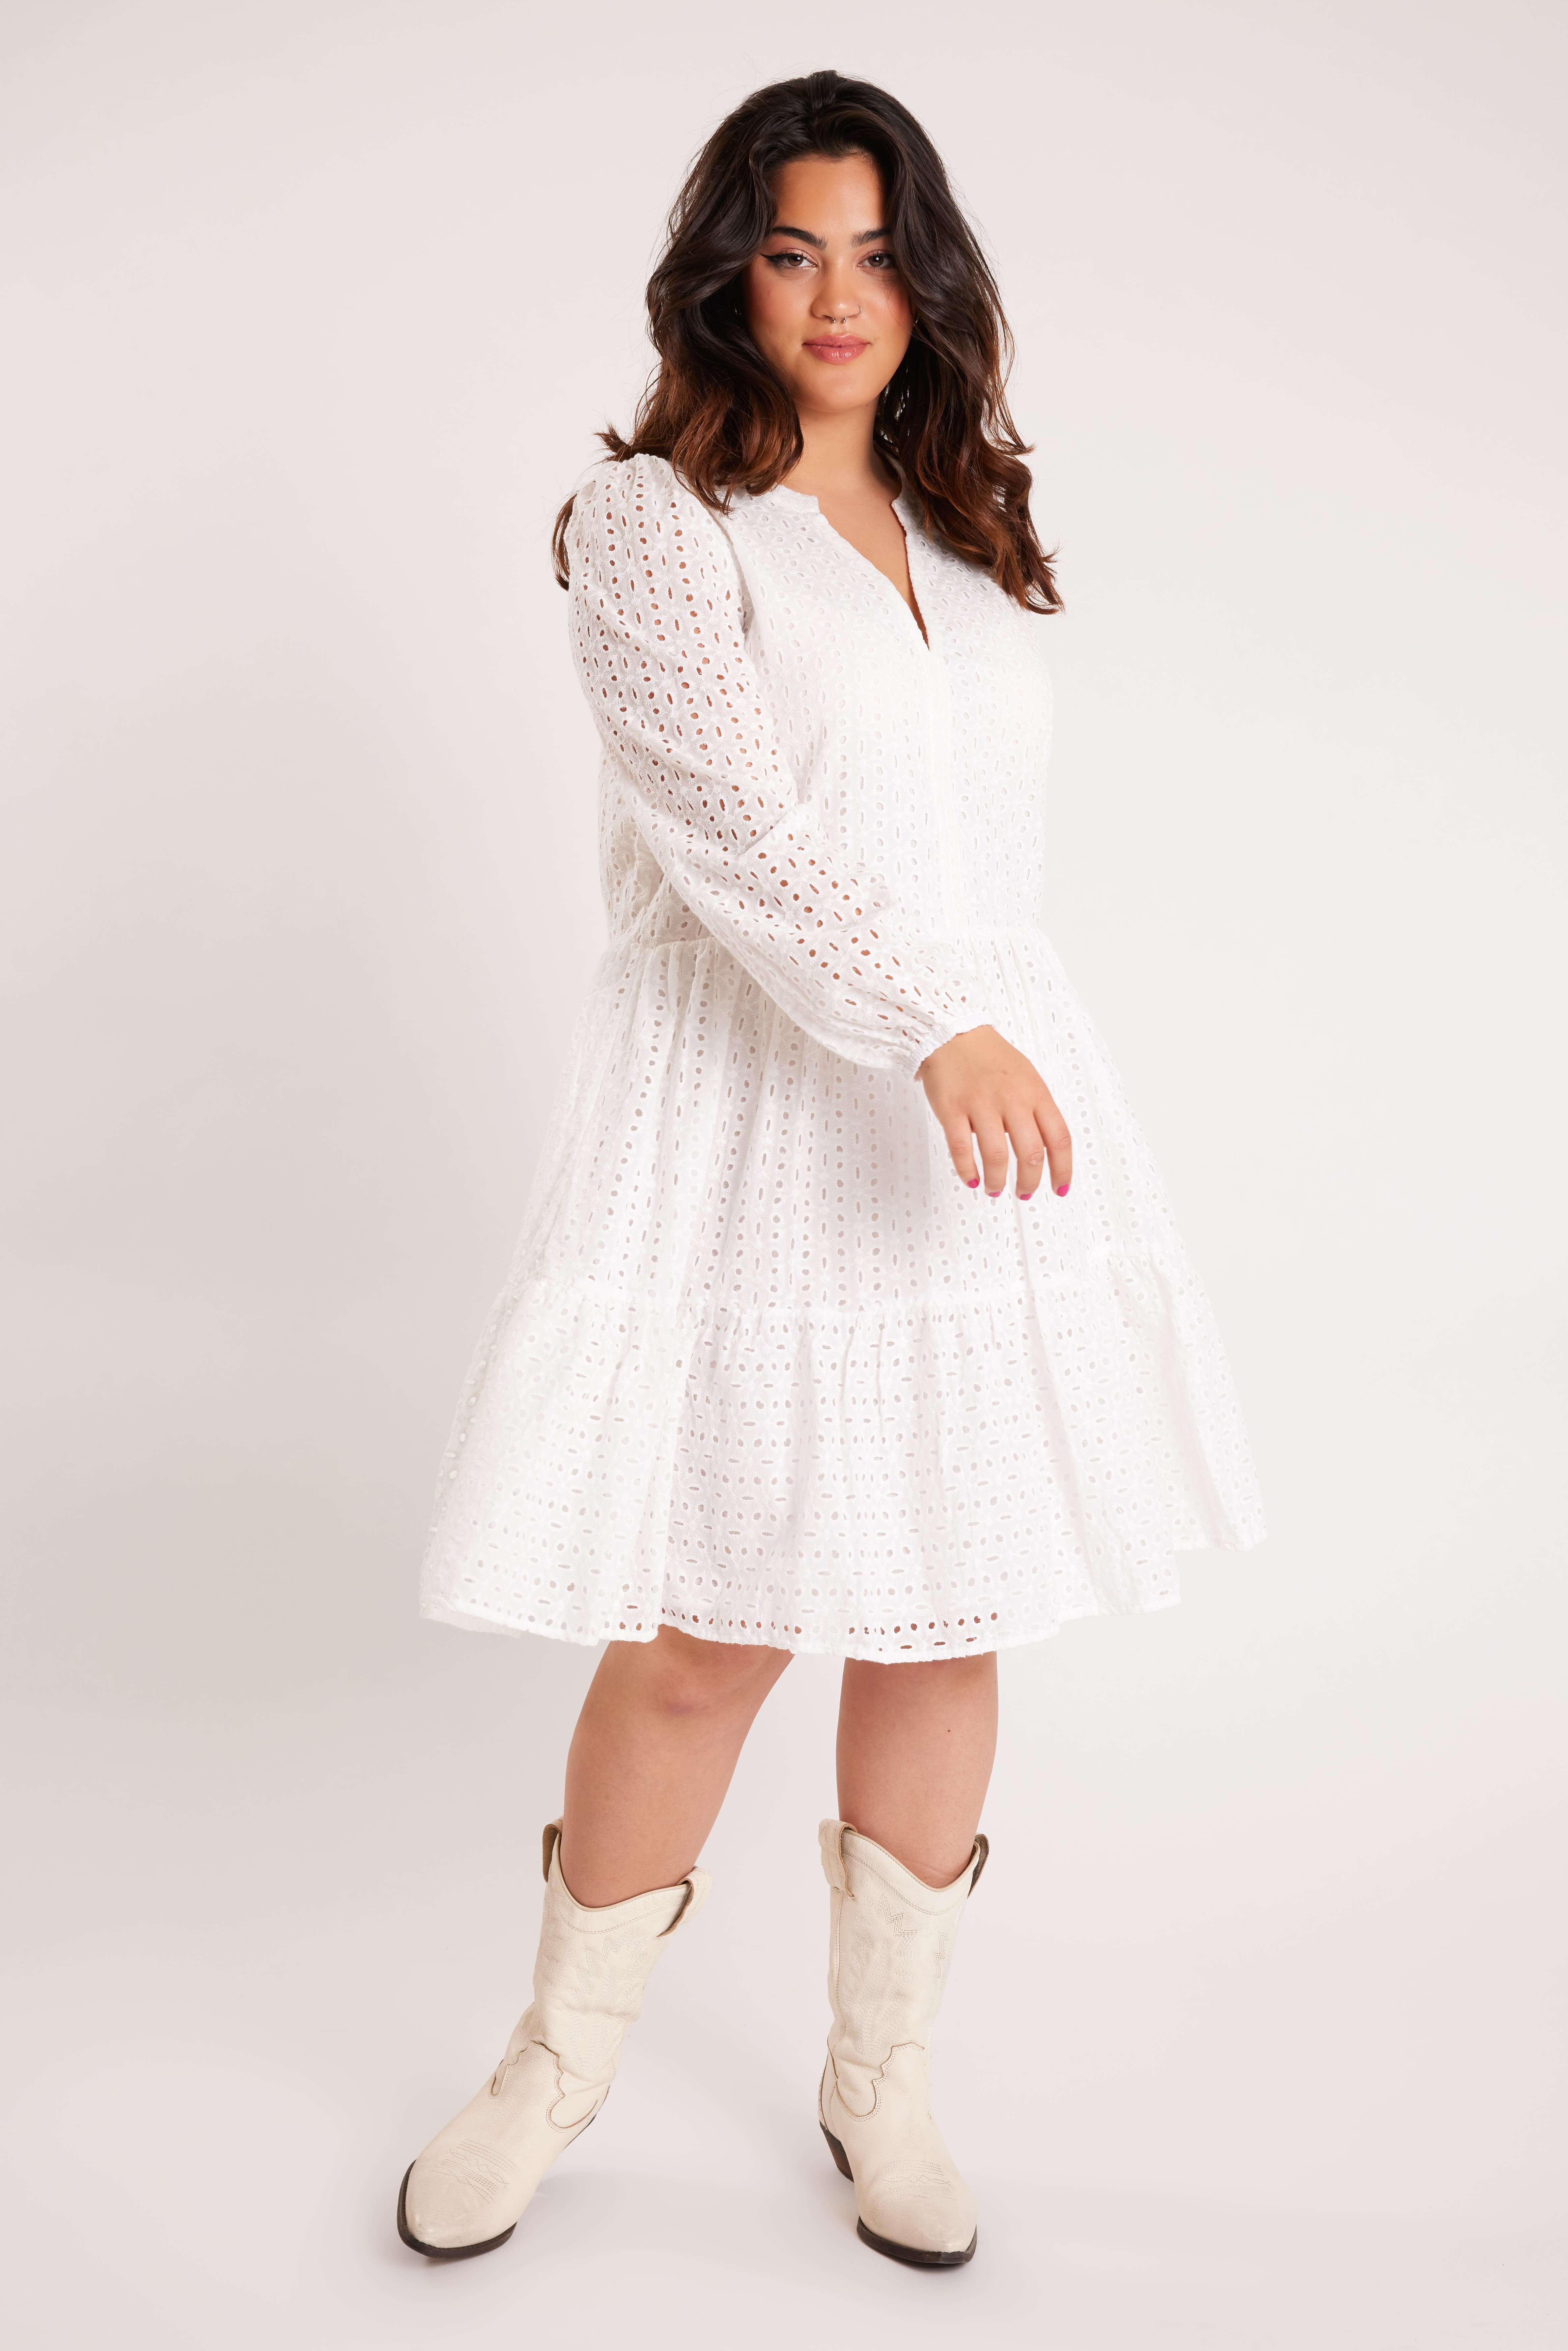 Robe avec broderie anglaise image 4